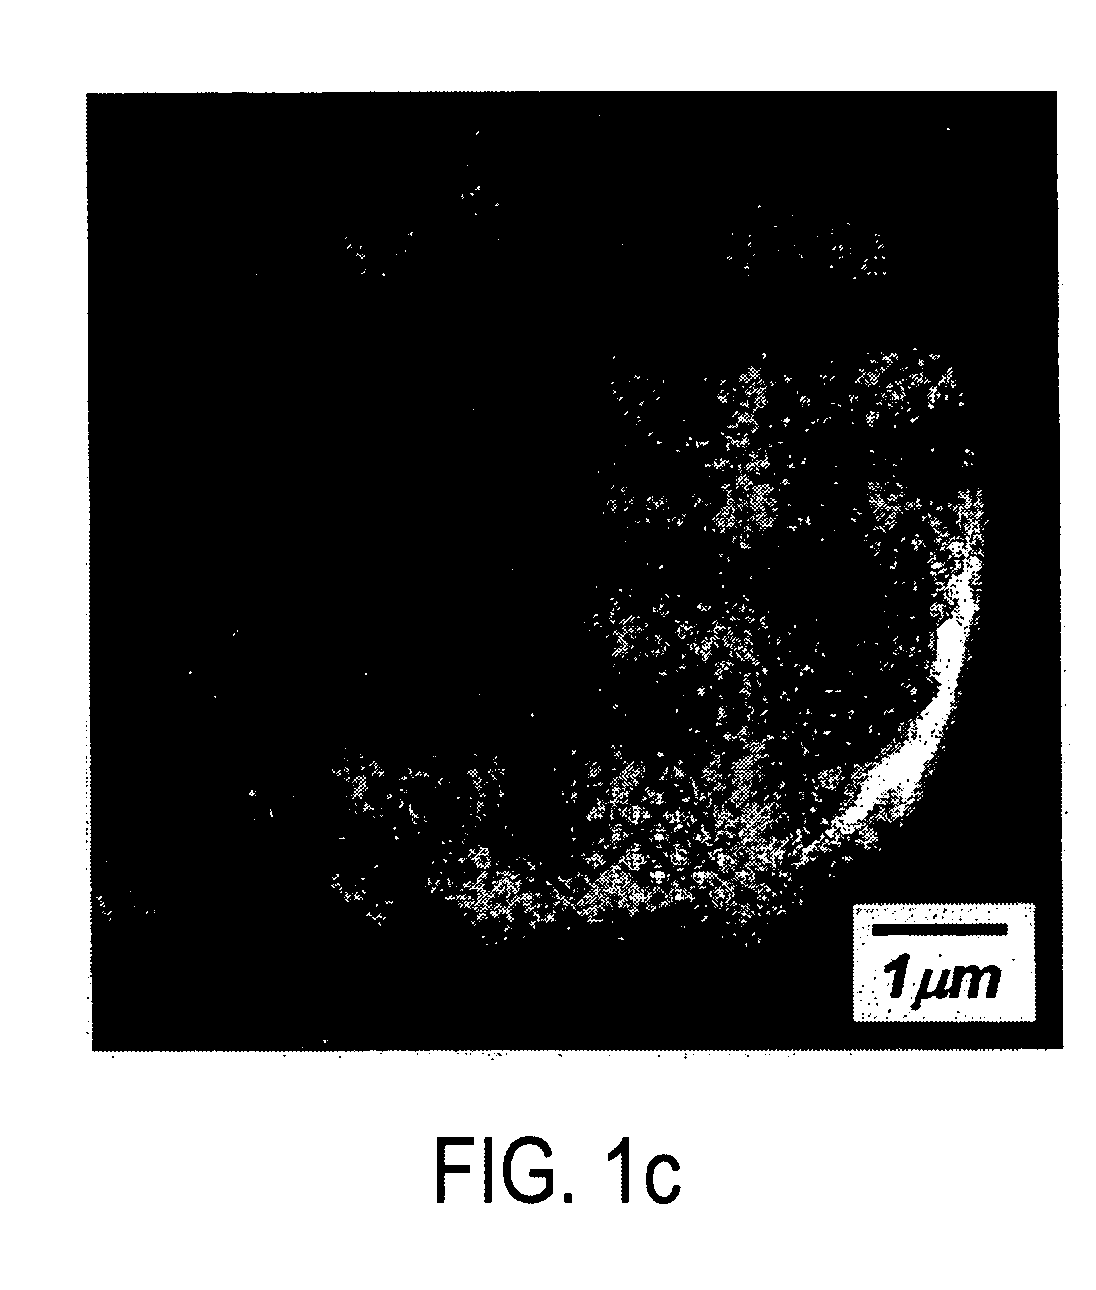 Method and apparatus for preparation of spherical metal carbonates and lithium metal oxides for lithium rechargeable batteries